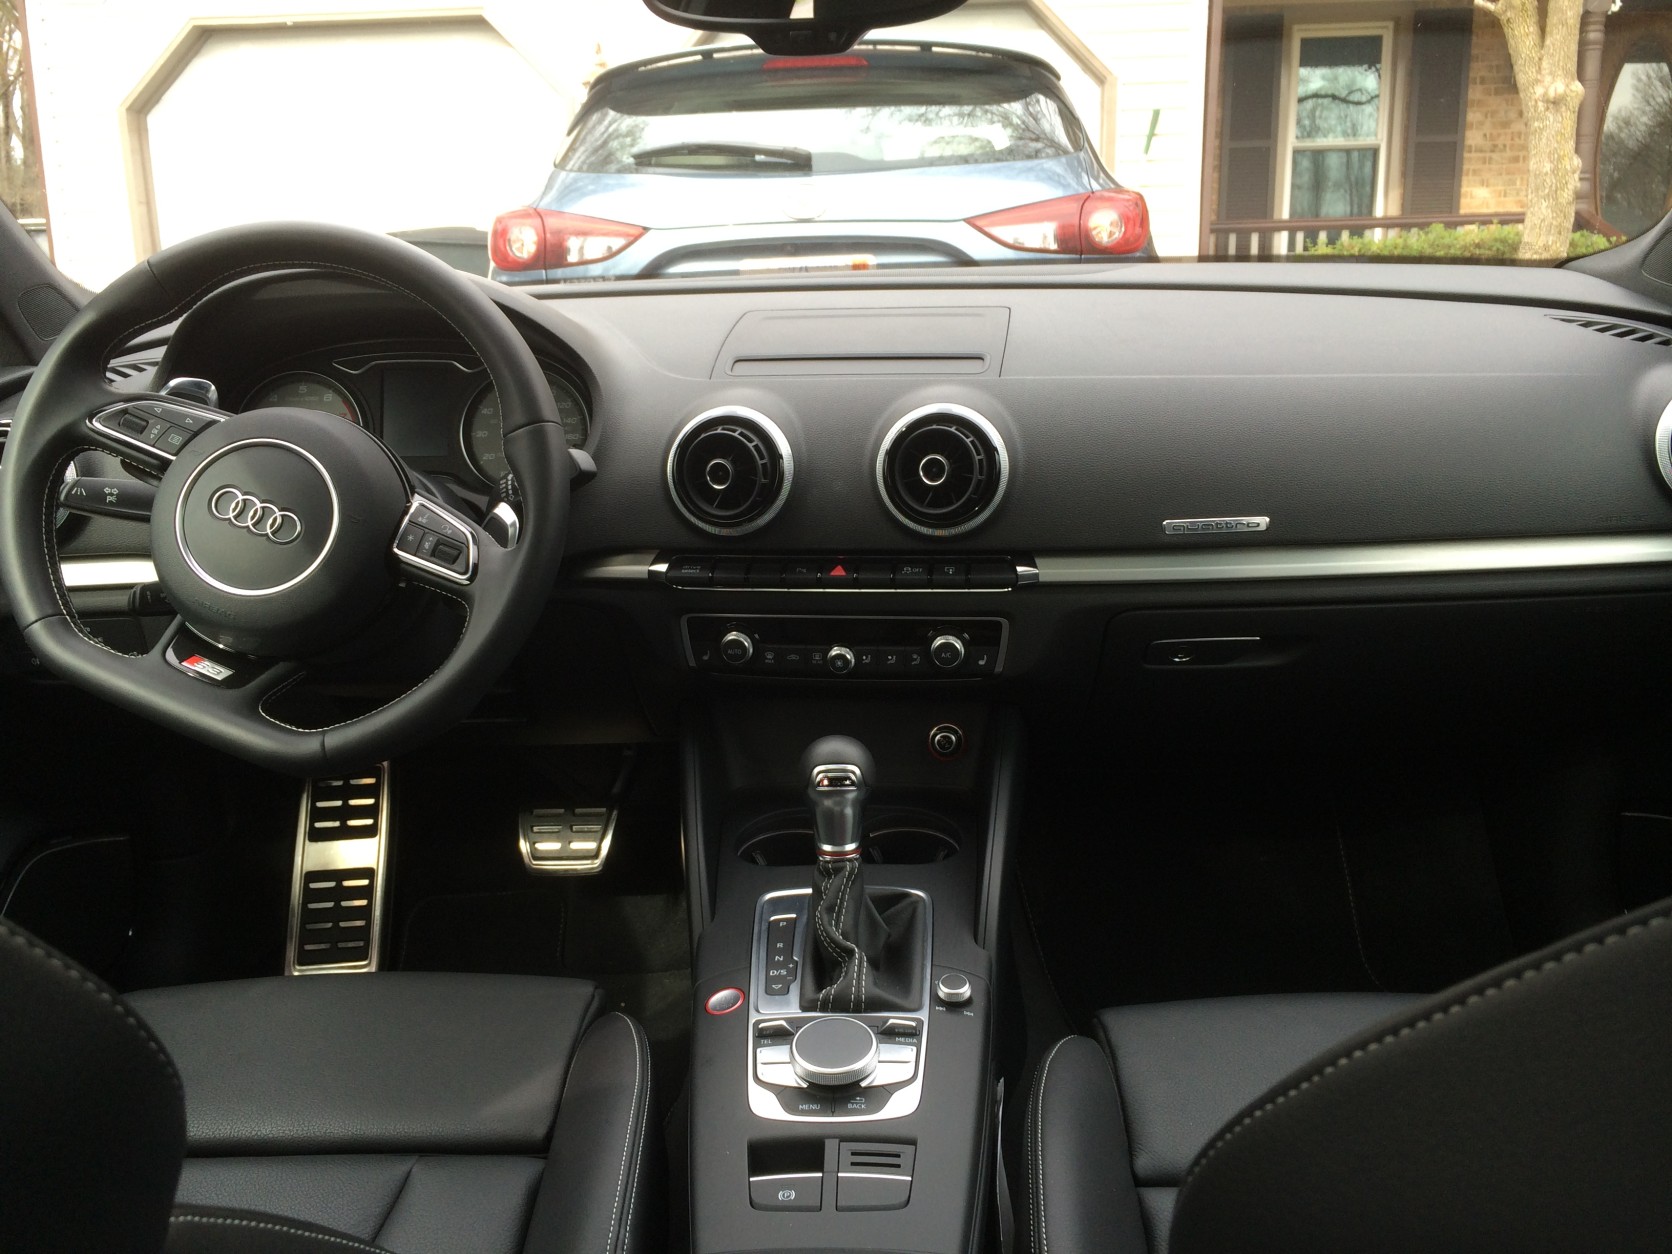 The interior is simple and professional. In a good way, the Audi S3 doesn't make much fuss. (WTOP/Mike Parris)